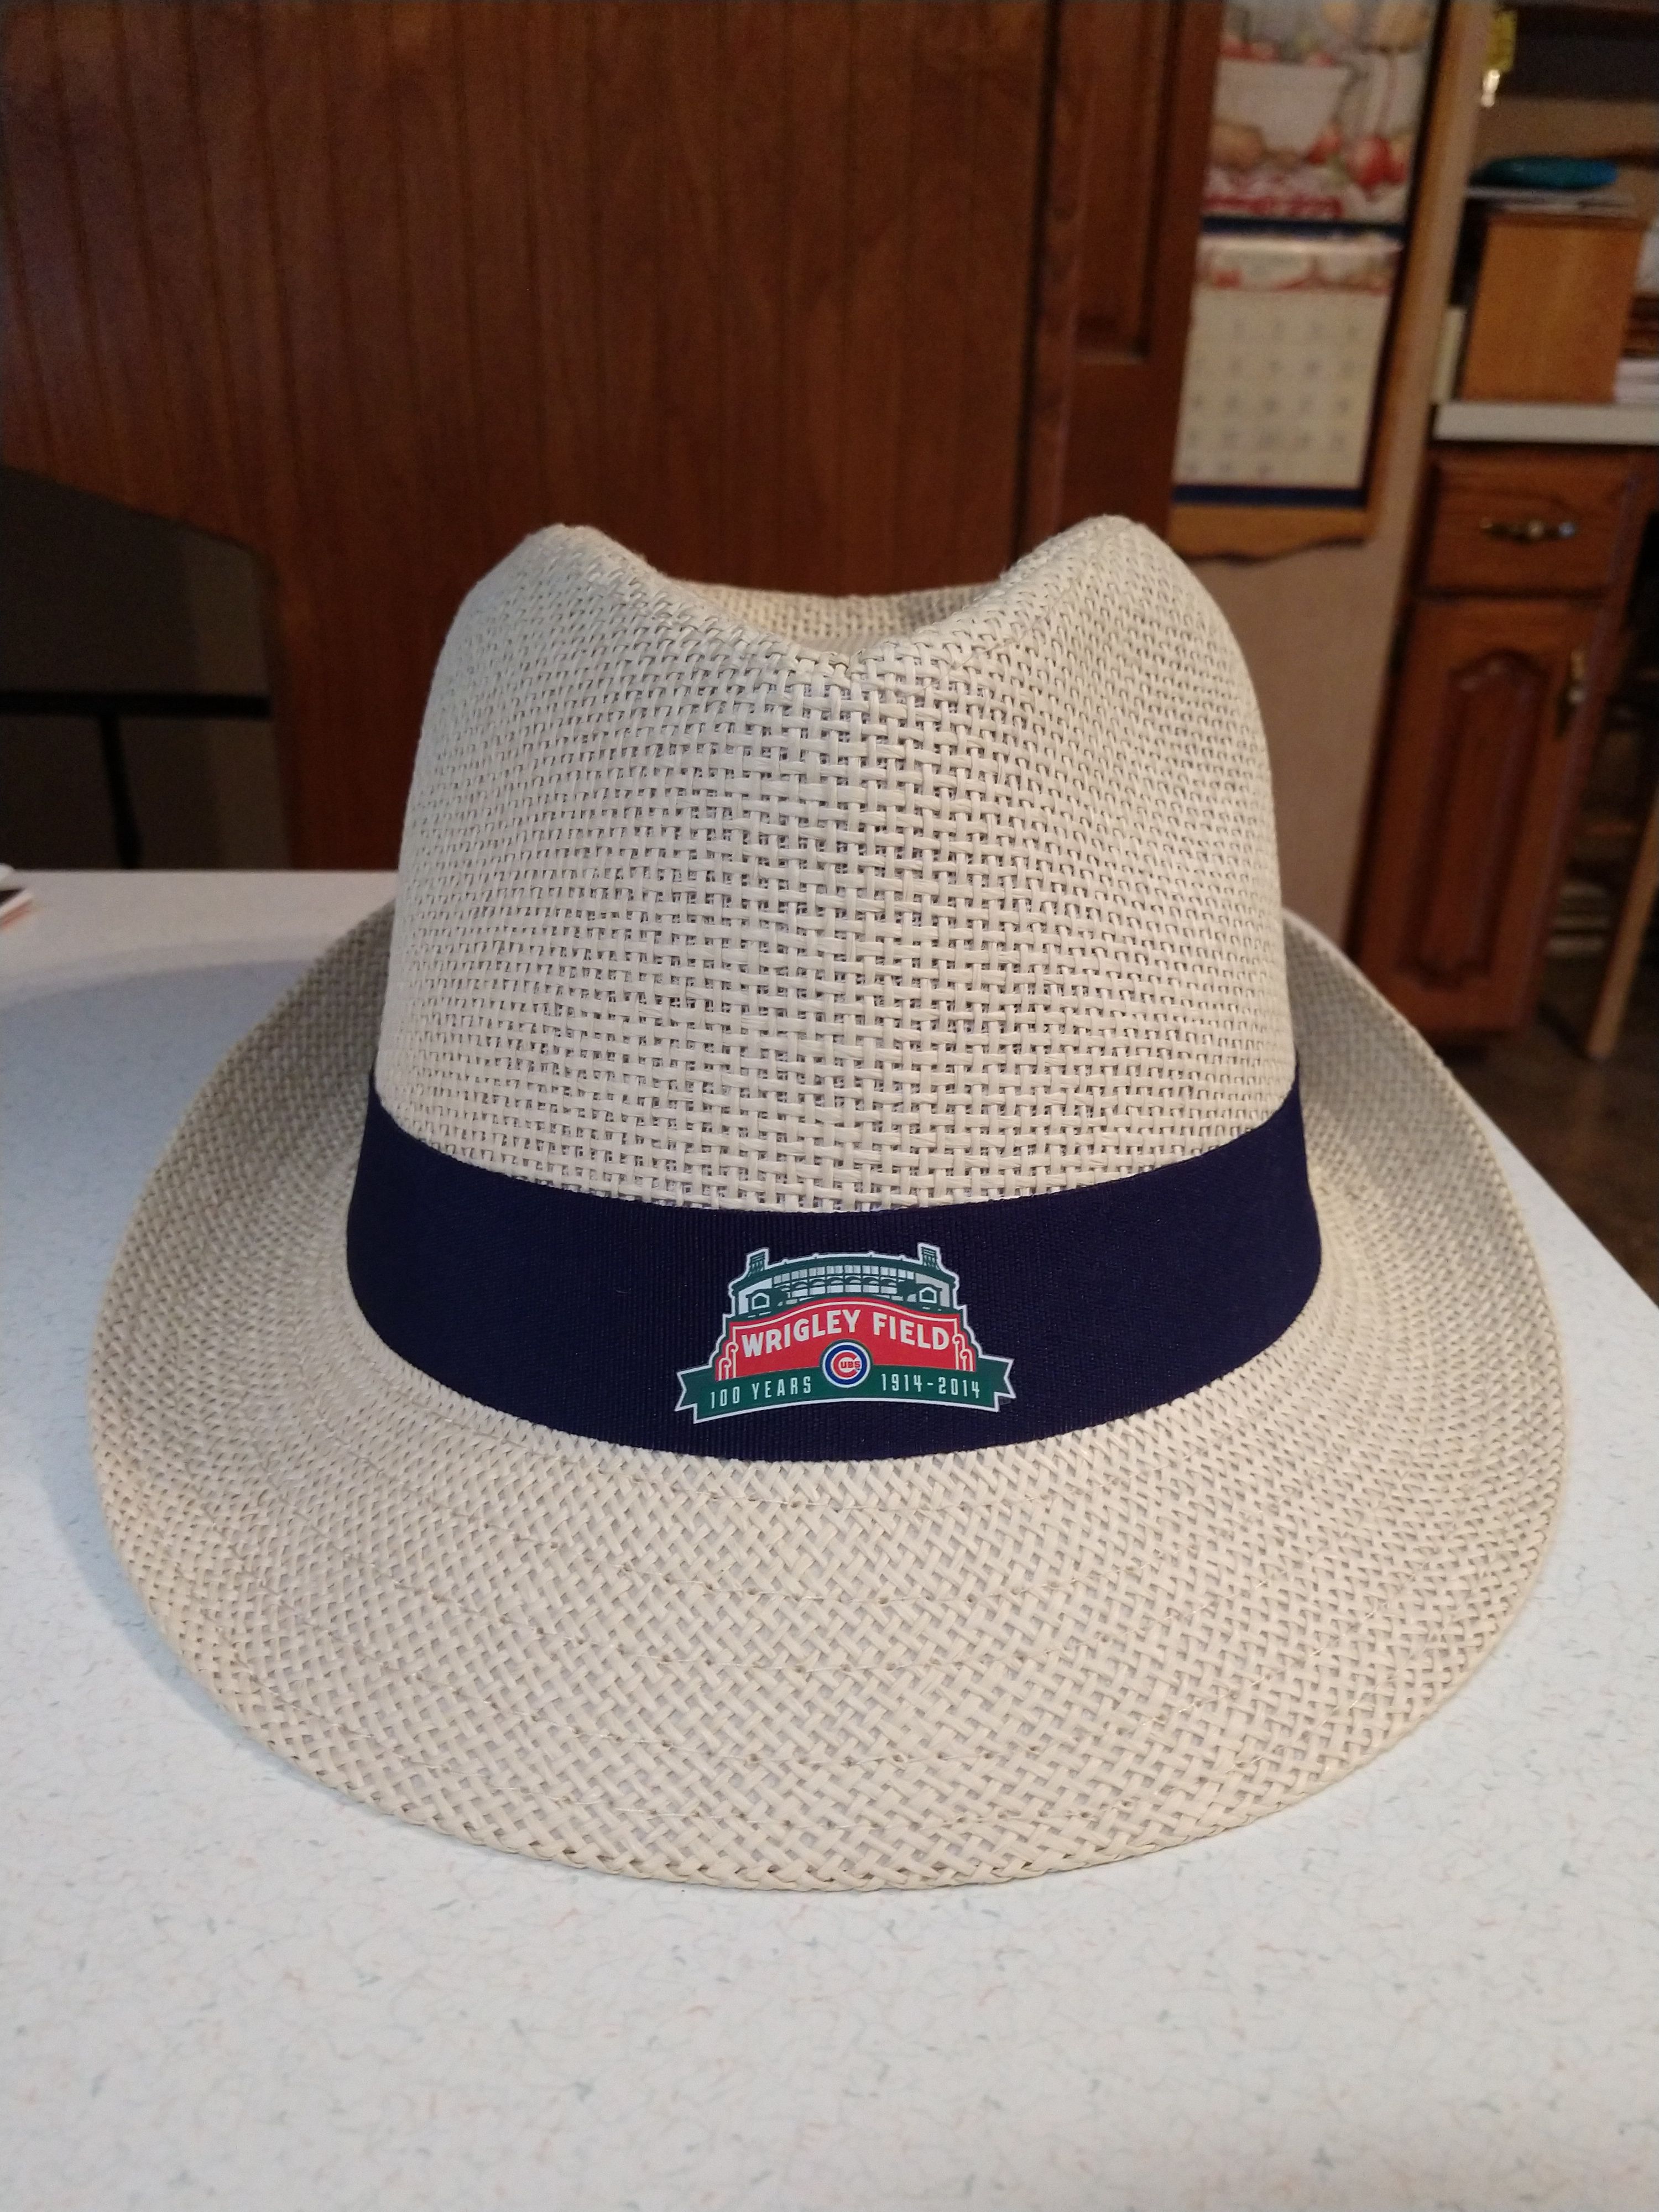 Chicago Cubs Wrigley Field 100 Years Fedora